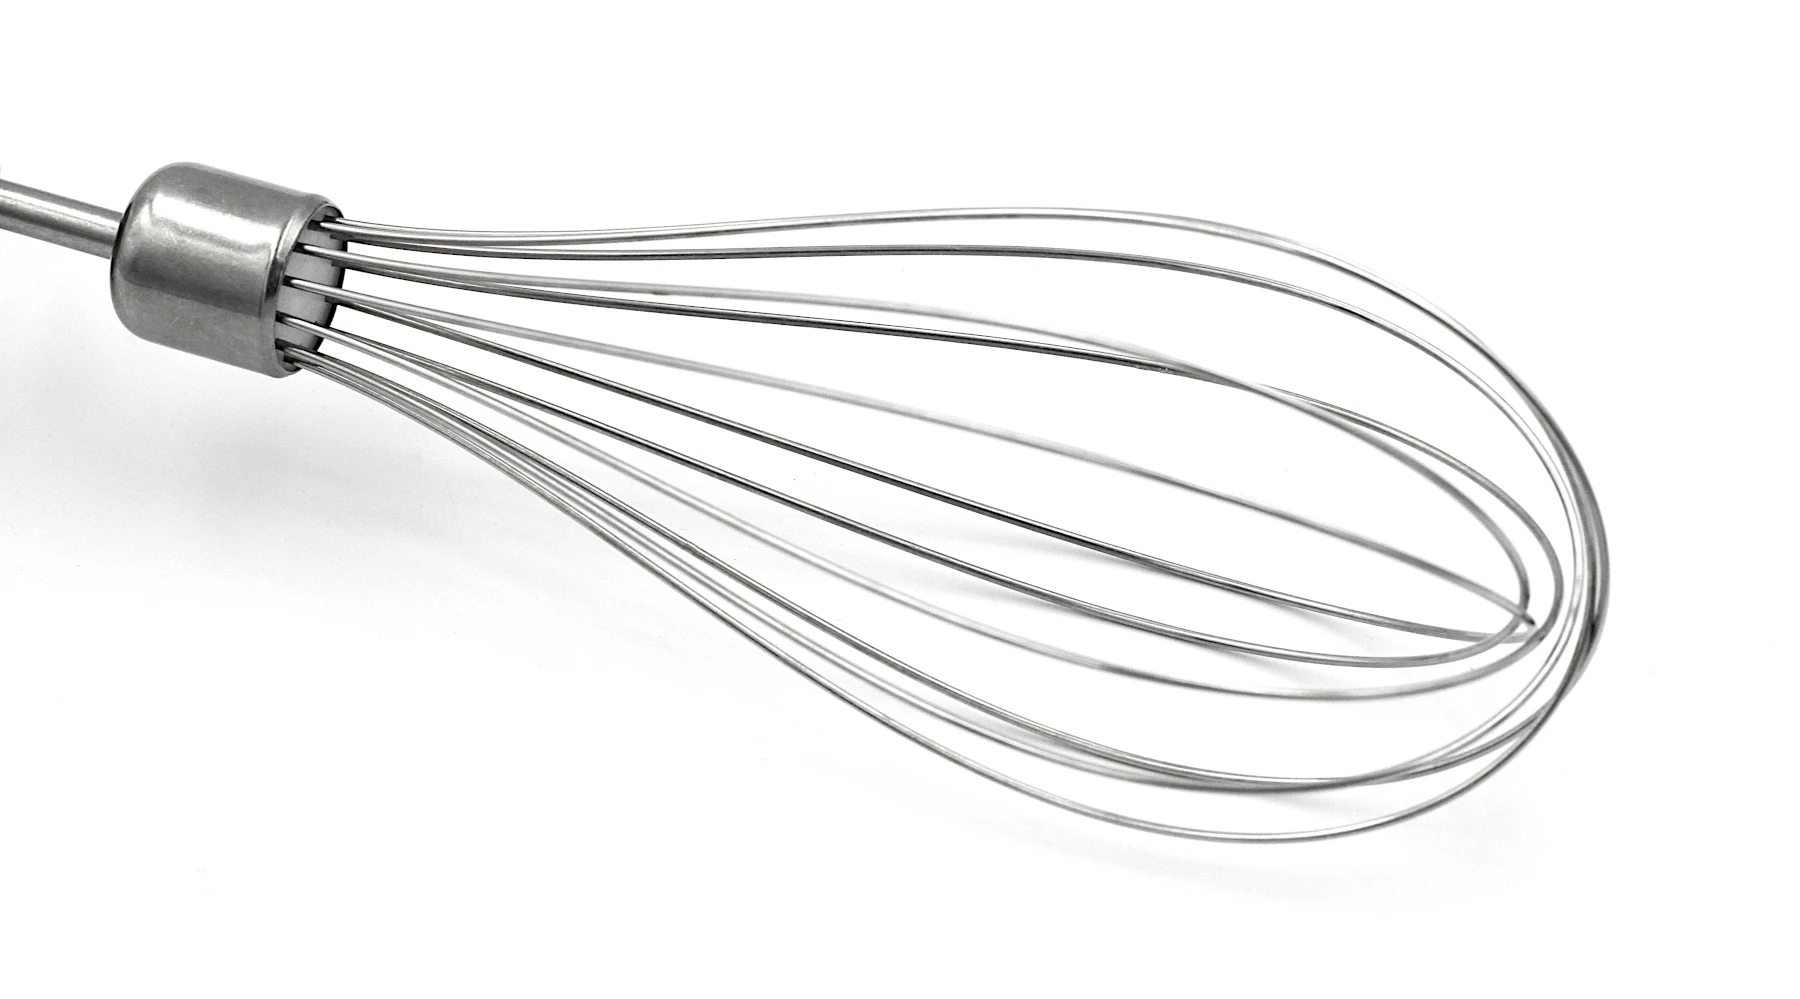  Whisk Wiper® PRO for Stand Mixers - Mix Without The